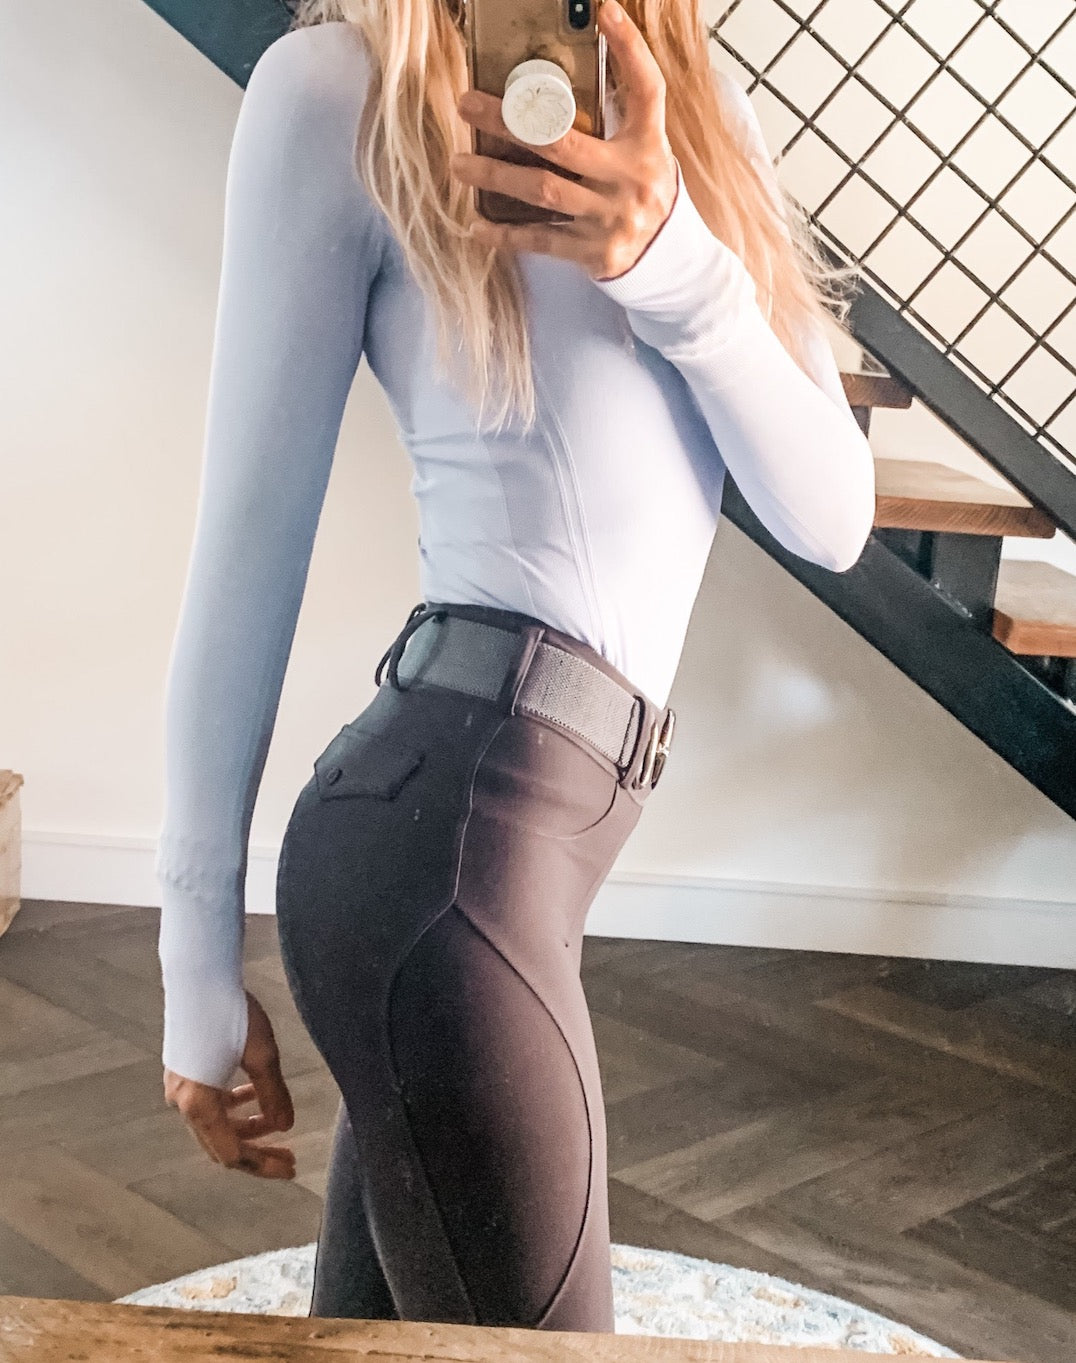 Imagine the future of equestrian apparel. Picture a pair of riding breeches designed with innovative fabric technology. These pants comfortably contour a rider's body, allowing for effortless movement